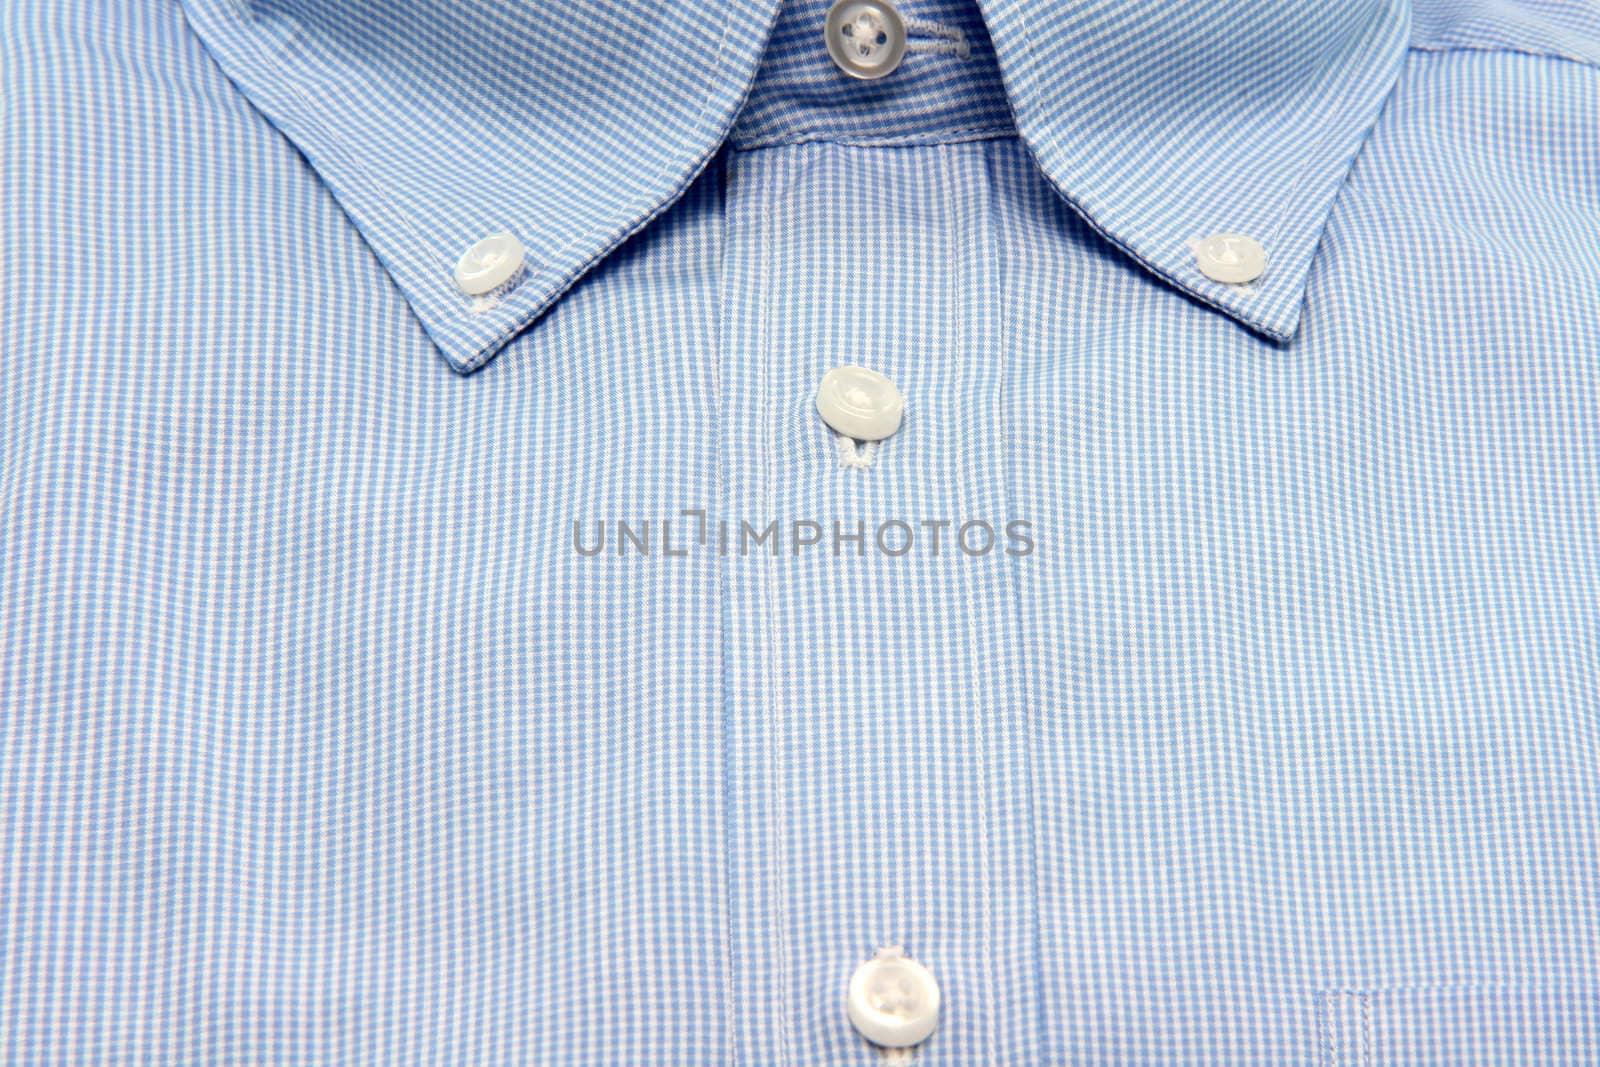 business clothing shirt for background fashion concepts